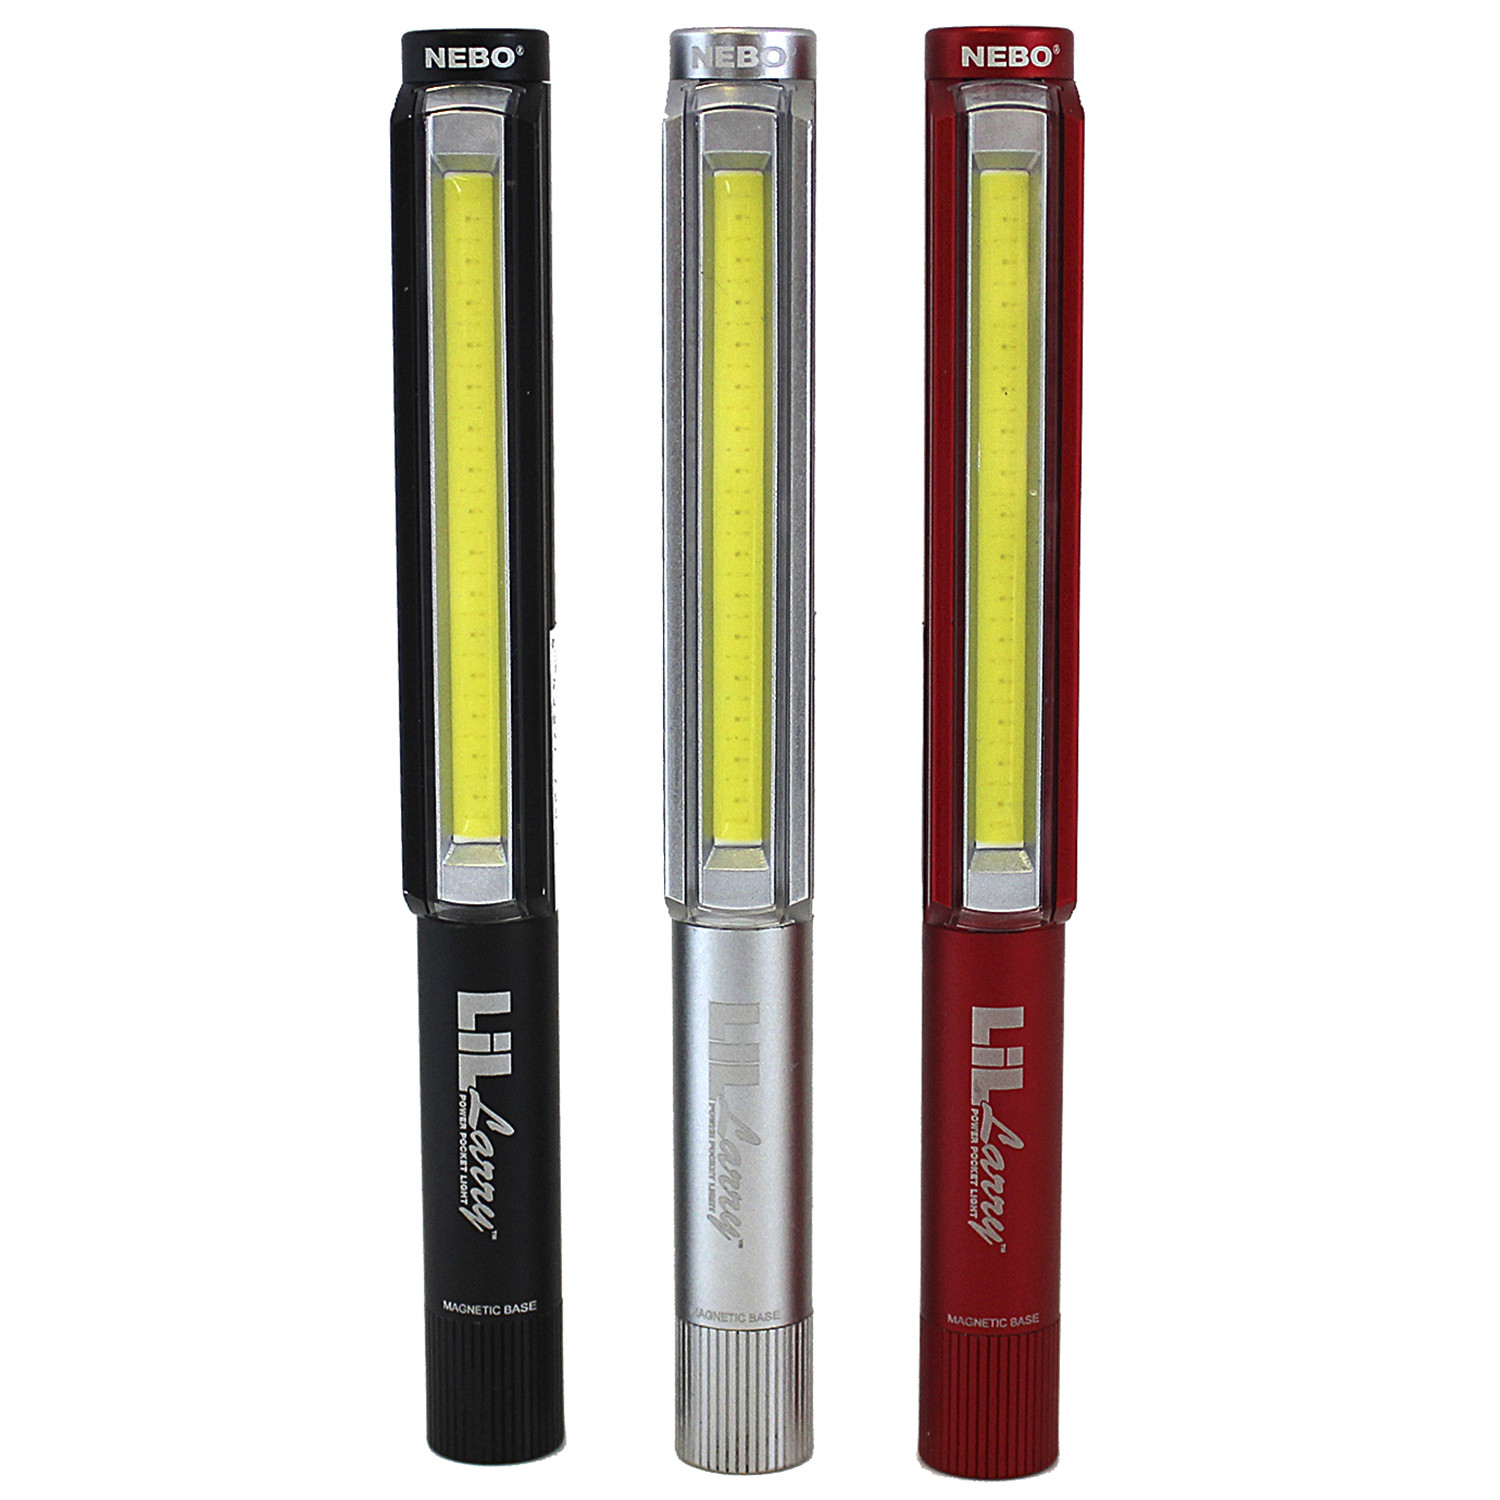 Single Lil Larry LED Pocket Light in Assorted styles Image 1